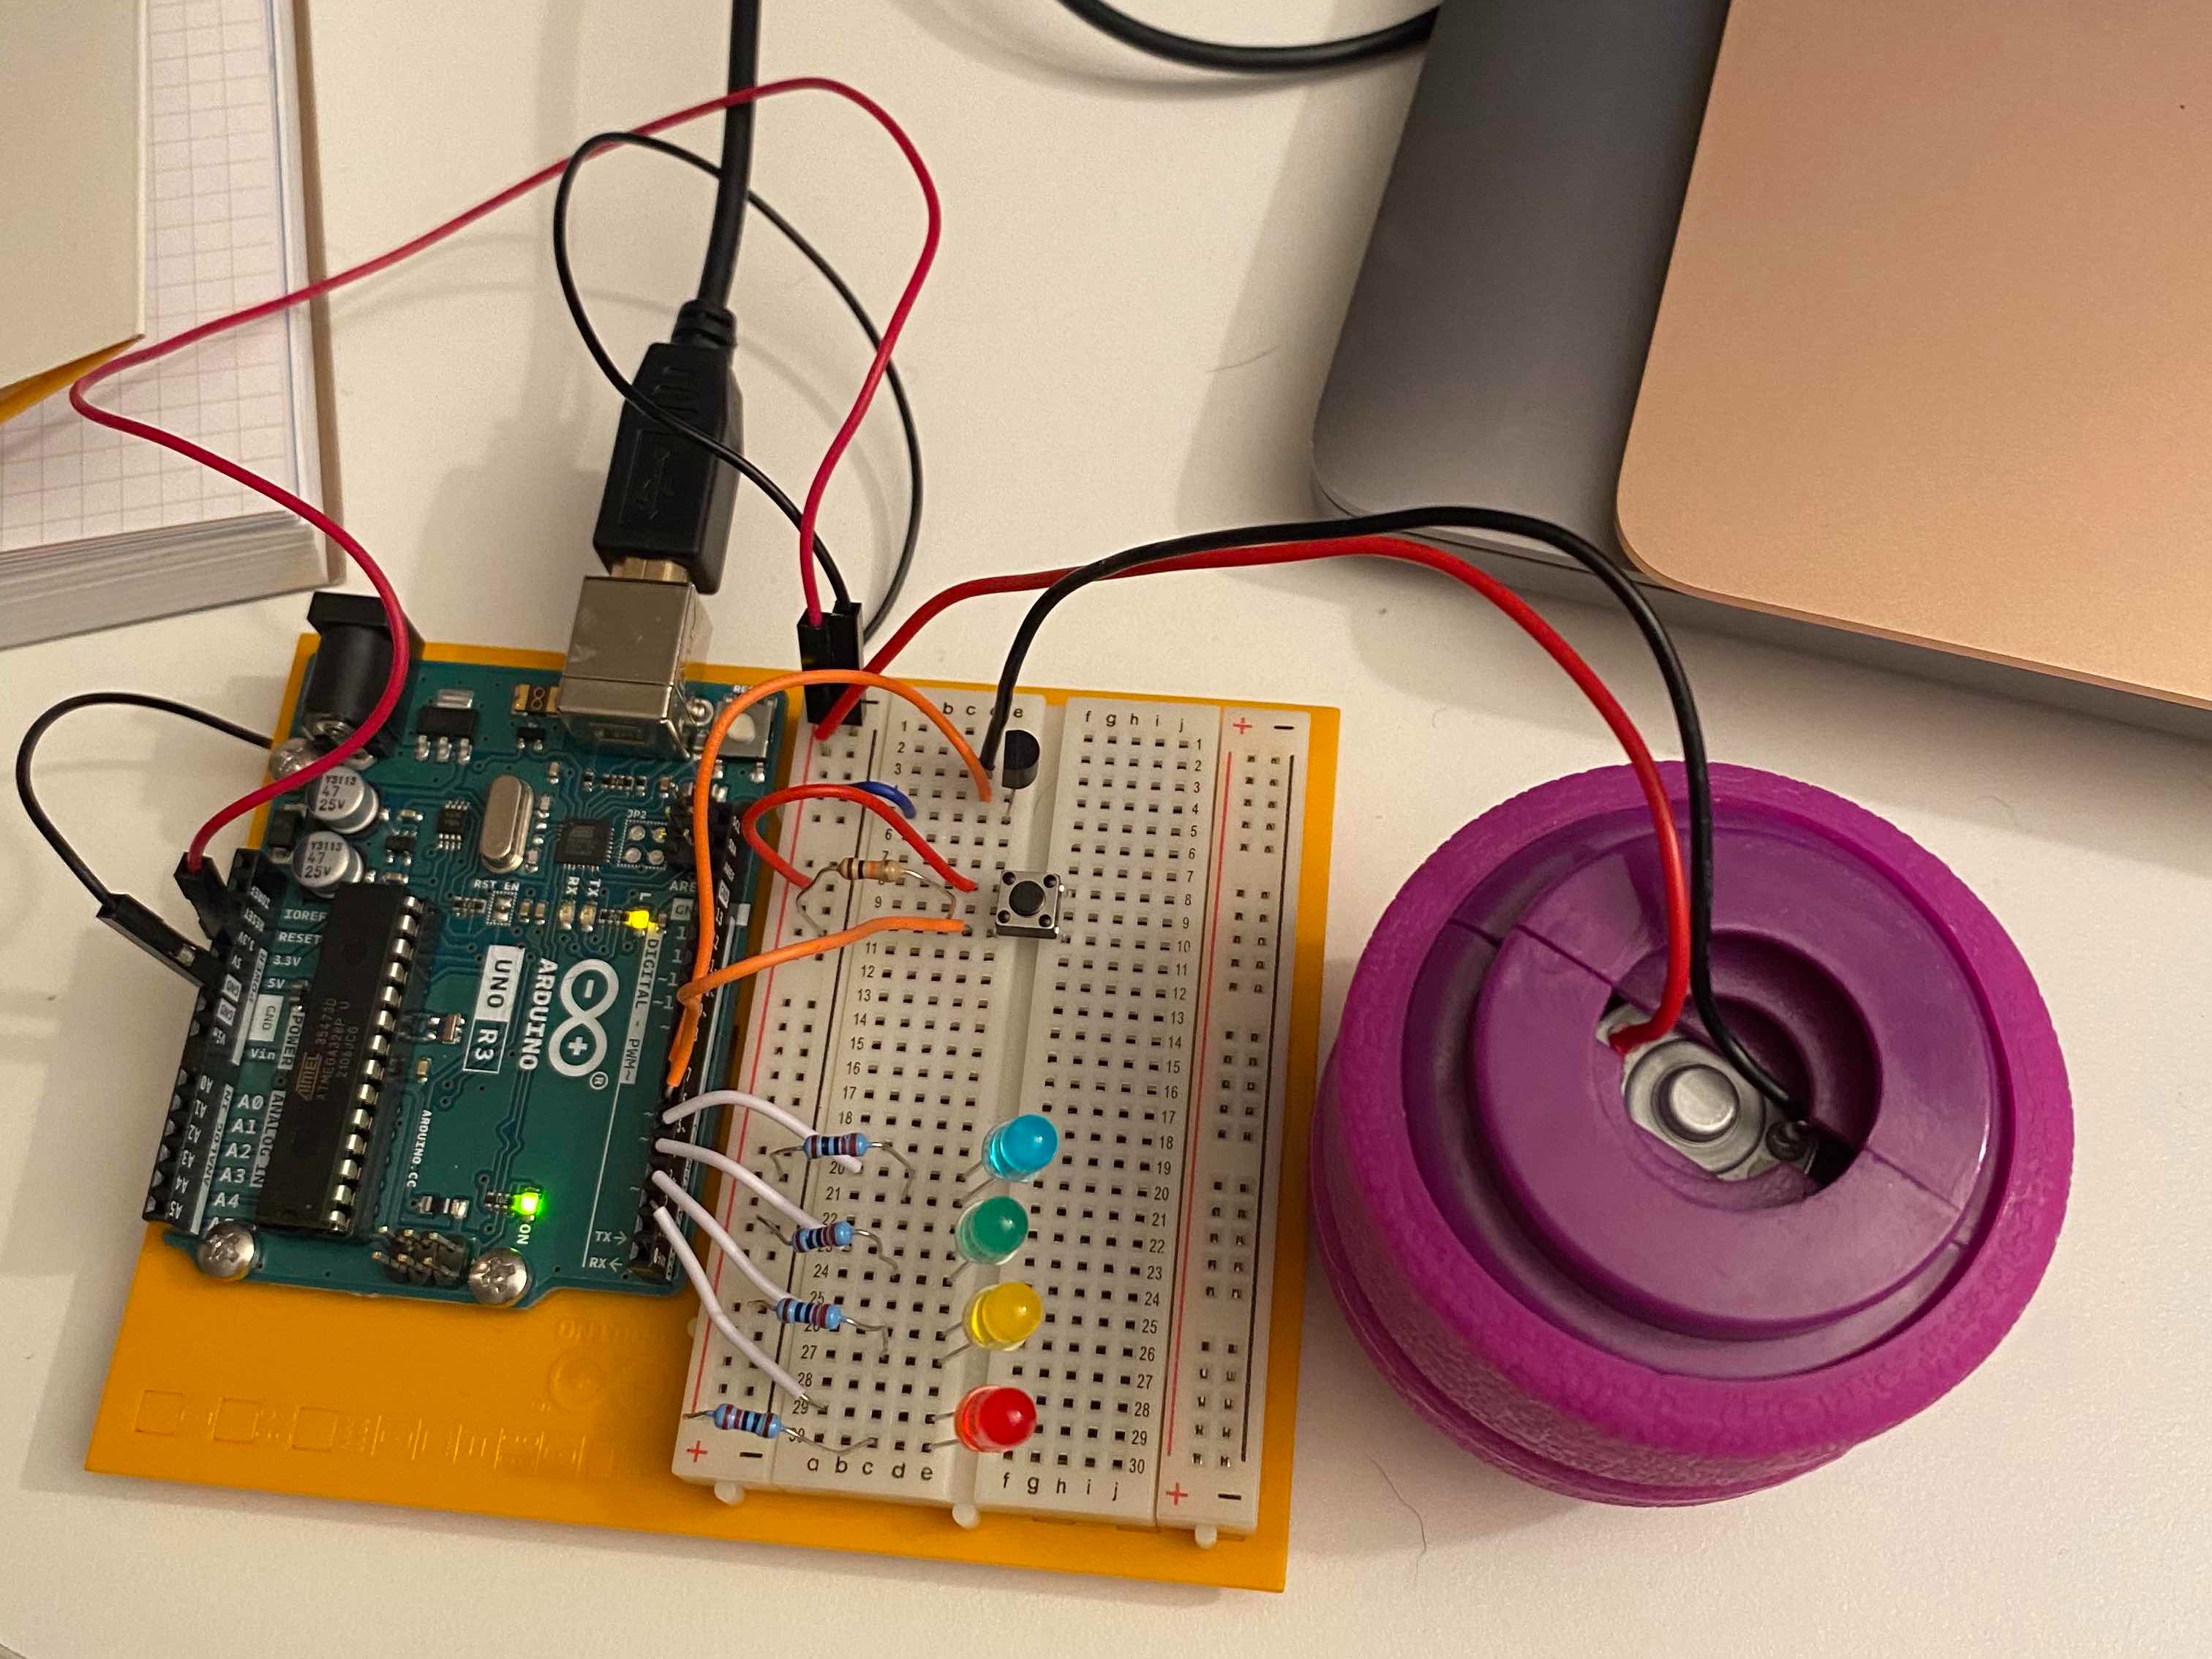 photo of an arduino and breadboard circuit with 4 colored LEDs, a button, and a purple circular object. There is a laptop in the upper left corner